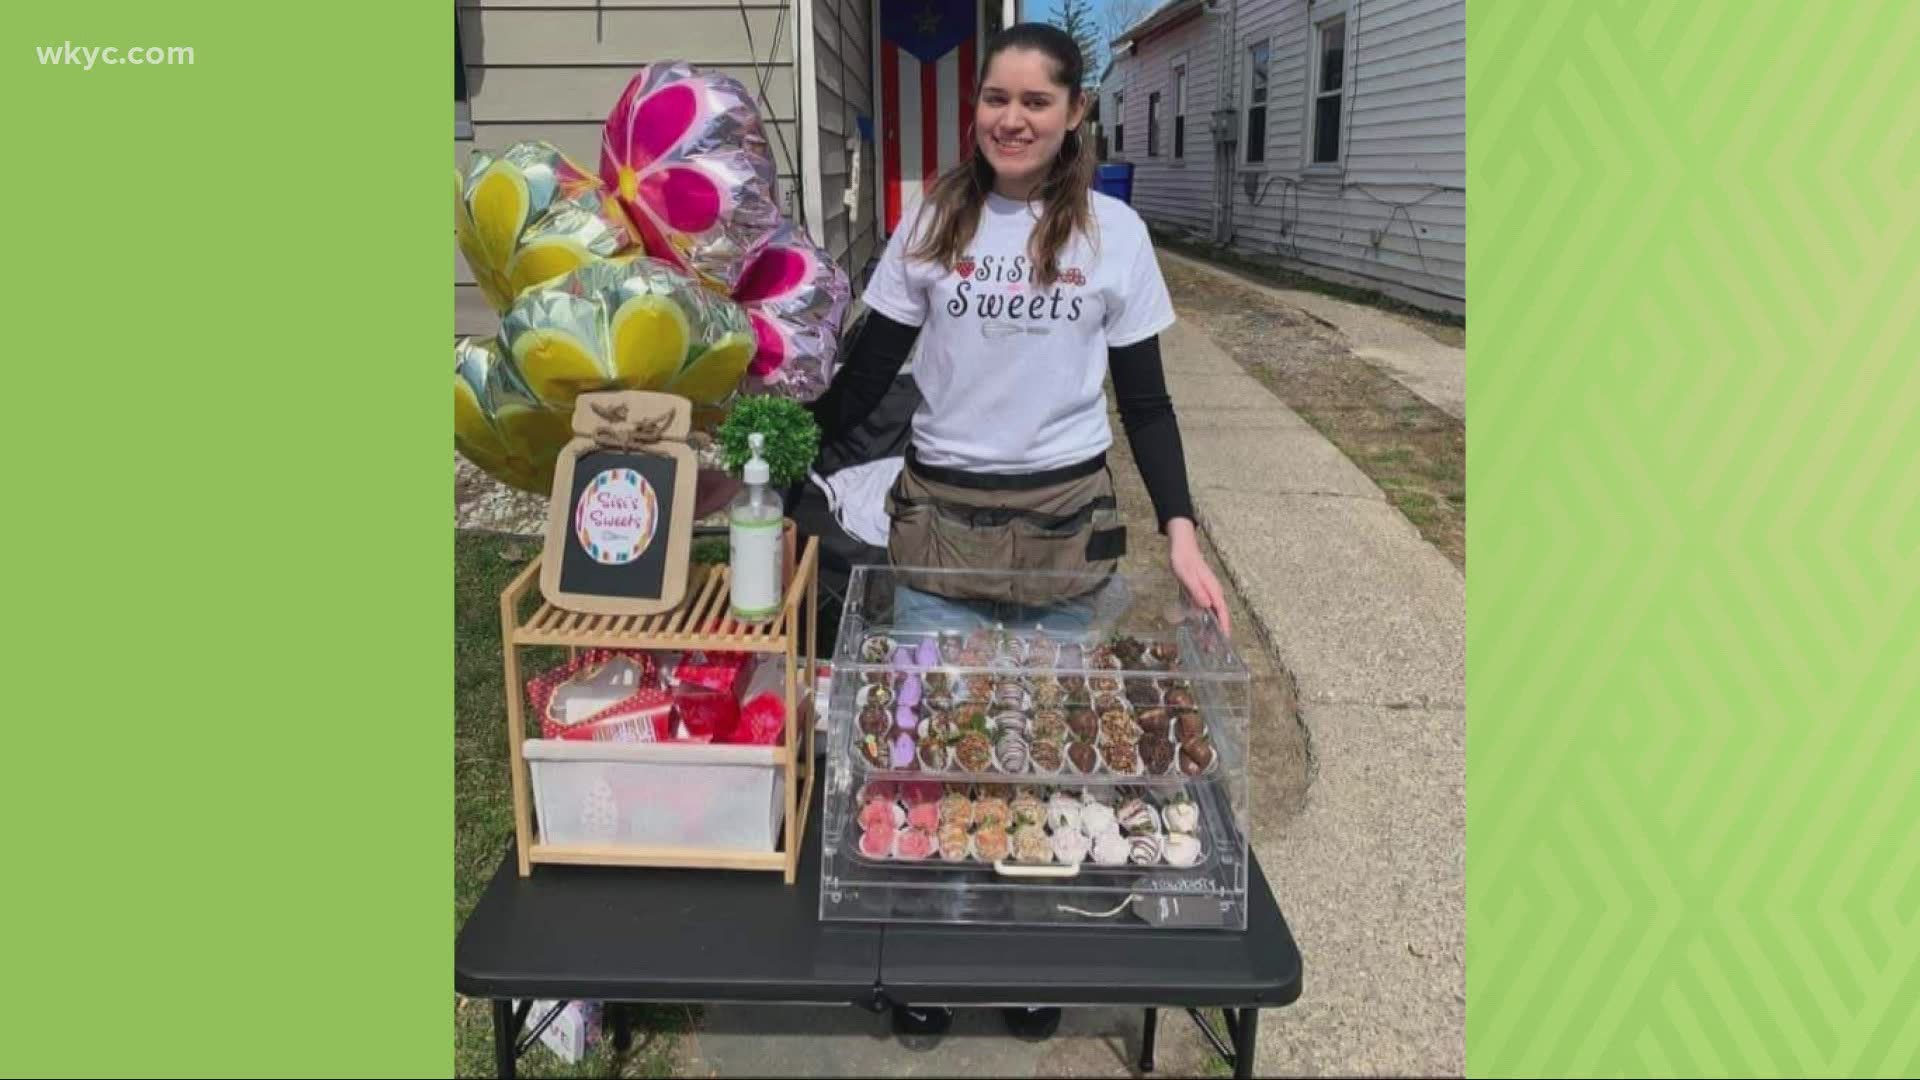 When she learned one year would cost her $83,000 to attend law school, Alysha Ginel started selling sweet treats to help pay the bills.